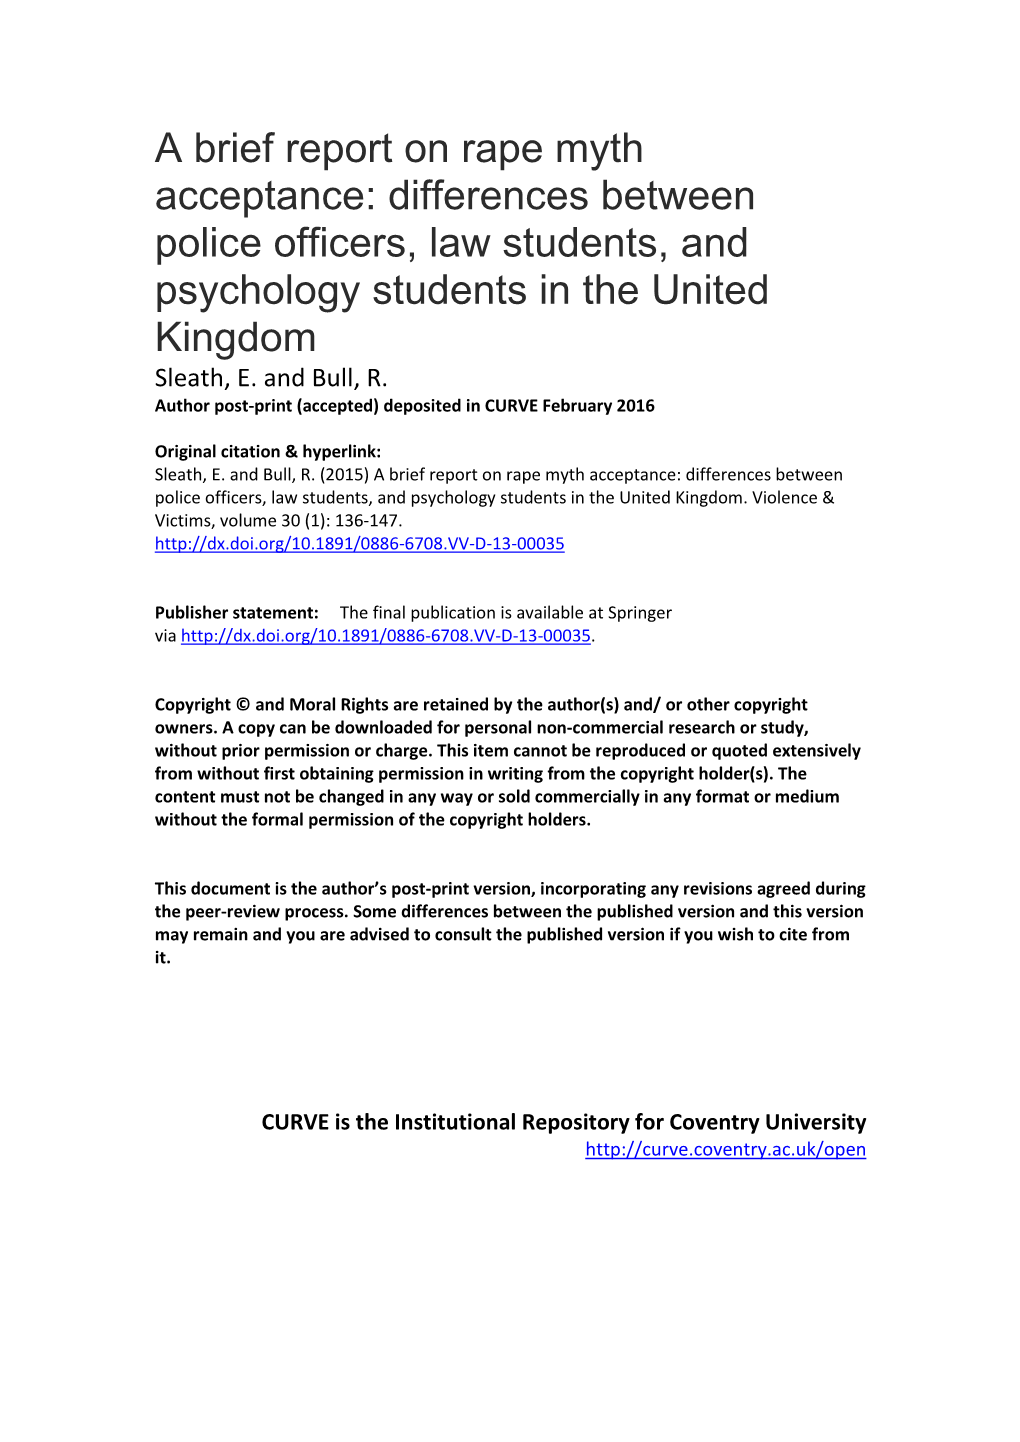 A Brief Report on Rape Myth Acceptance: Differences Between Police Officers, Law Students, and Psychology Students in the United Kingdom Sleath, E